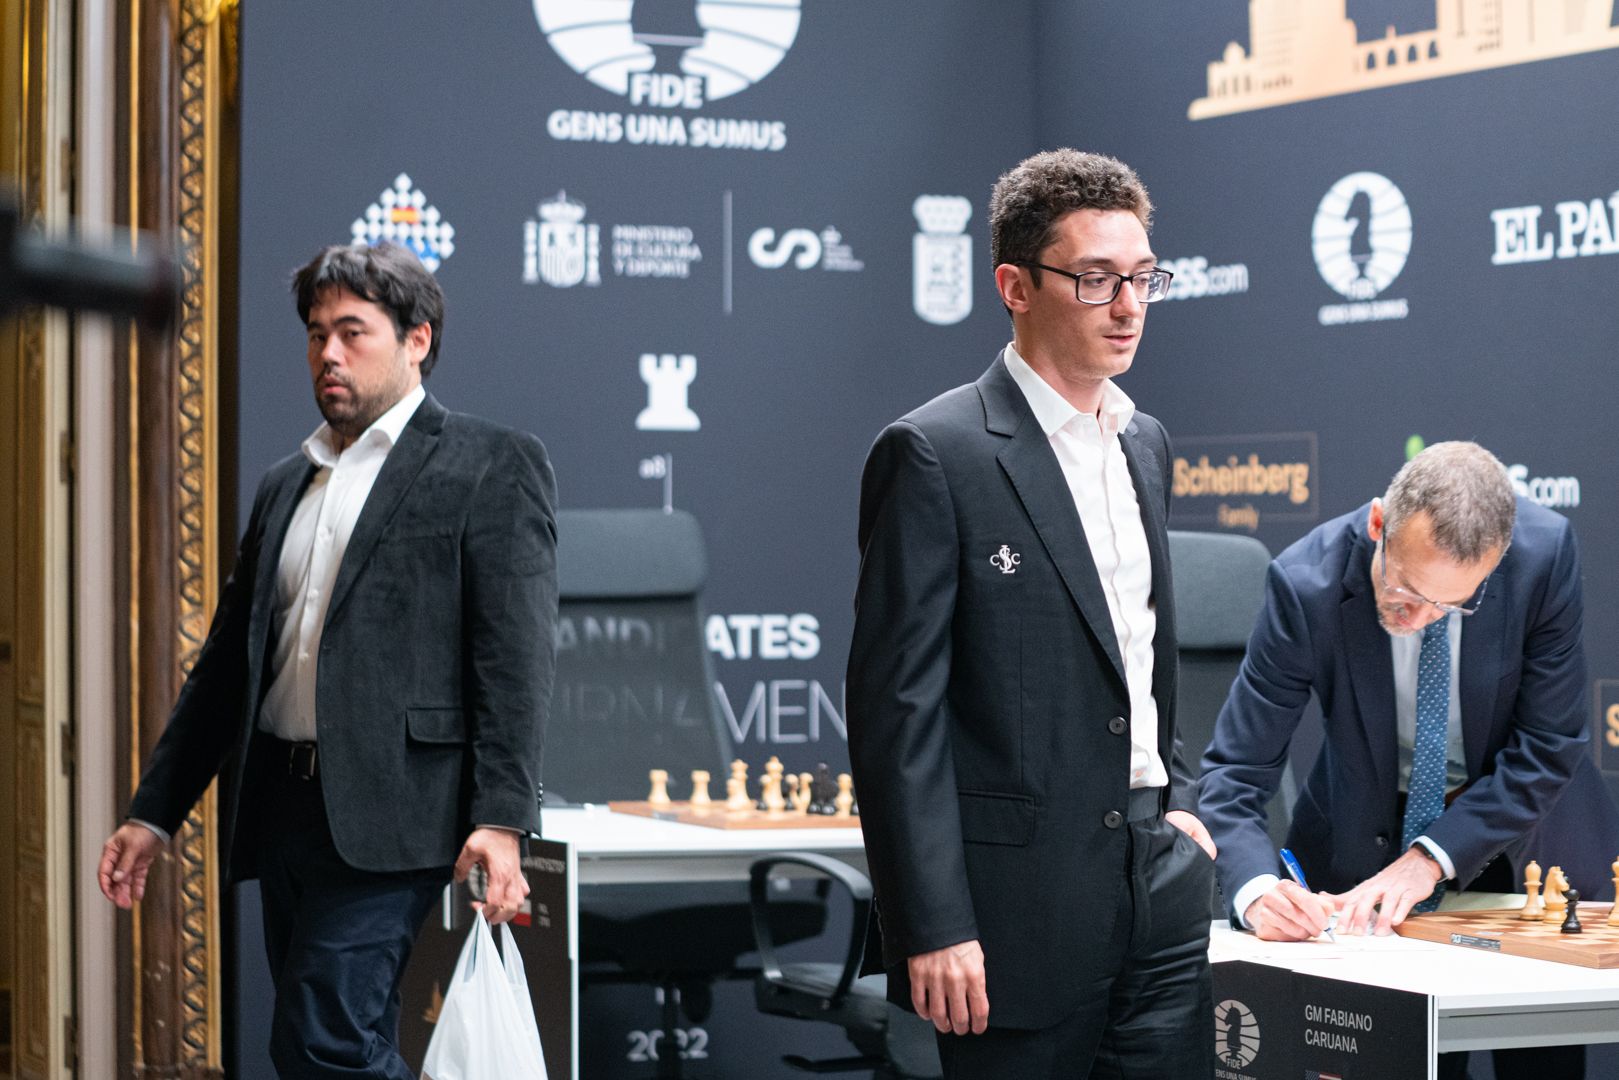 ChessBase India on Instagram: FIDE Candidates 2022 Round 8: Nakamura wins  a technical masterpiece Hikaru Nakamura is someone who is known for his  sharp and fast play. However, the world's most popular